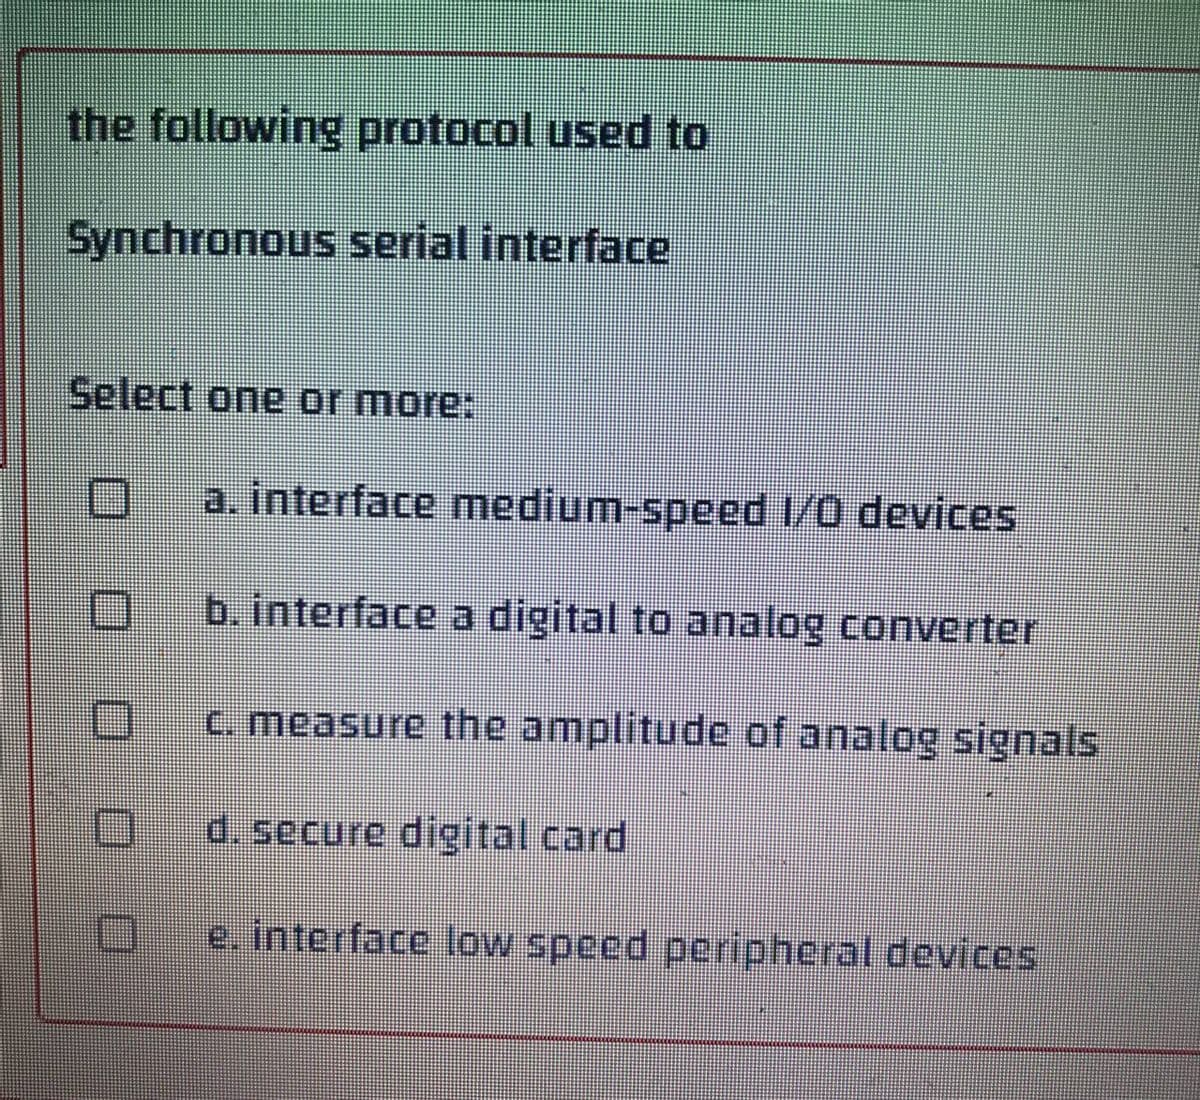 the following protocol used to
Synchronous serial interface
Select one or more:
O a. interface medium-speed 1/0 devices
O
b. interface a digital to analog converter
c. measure the amplitude of analog signals
O
d. secure digital card
e. interface low speed peripheral devices